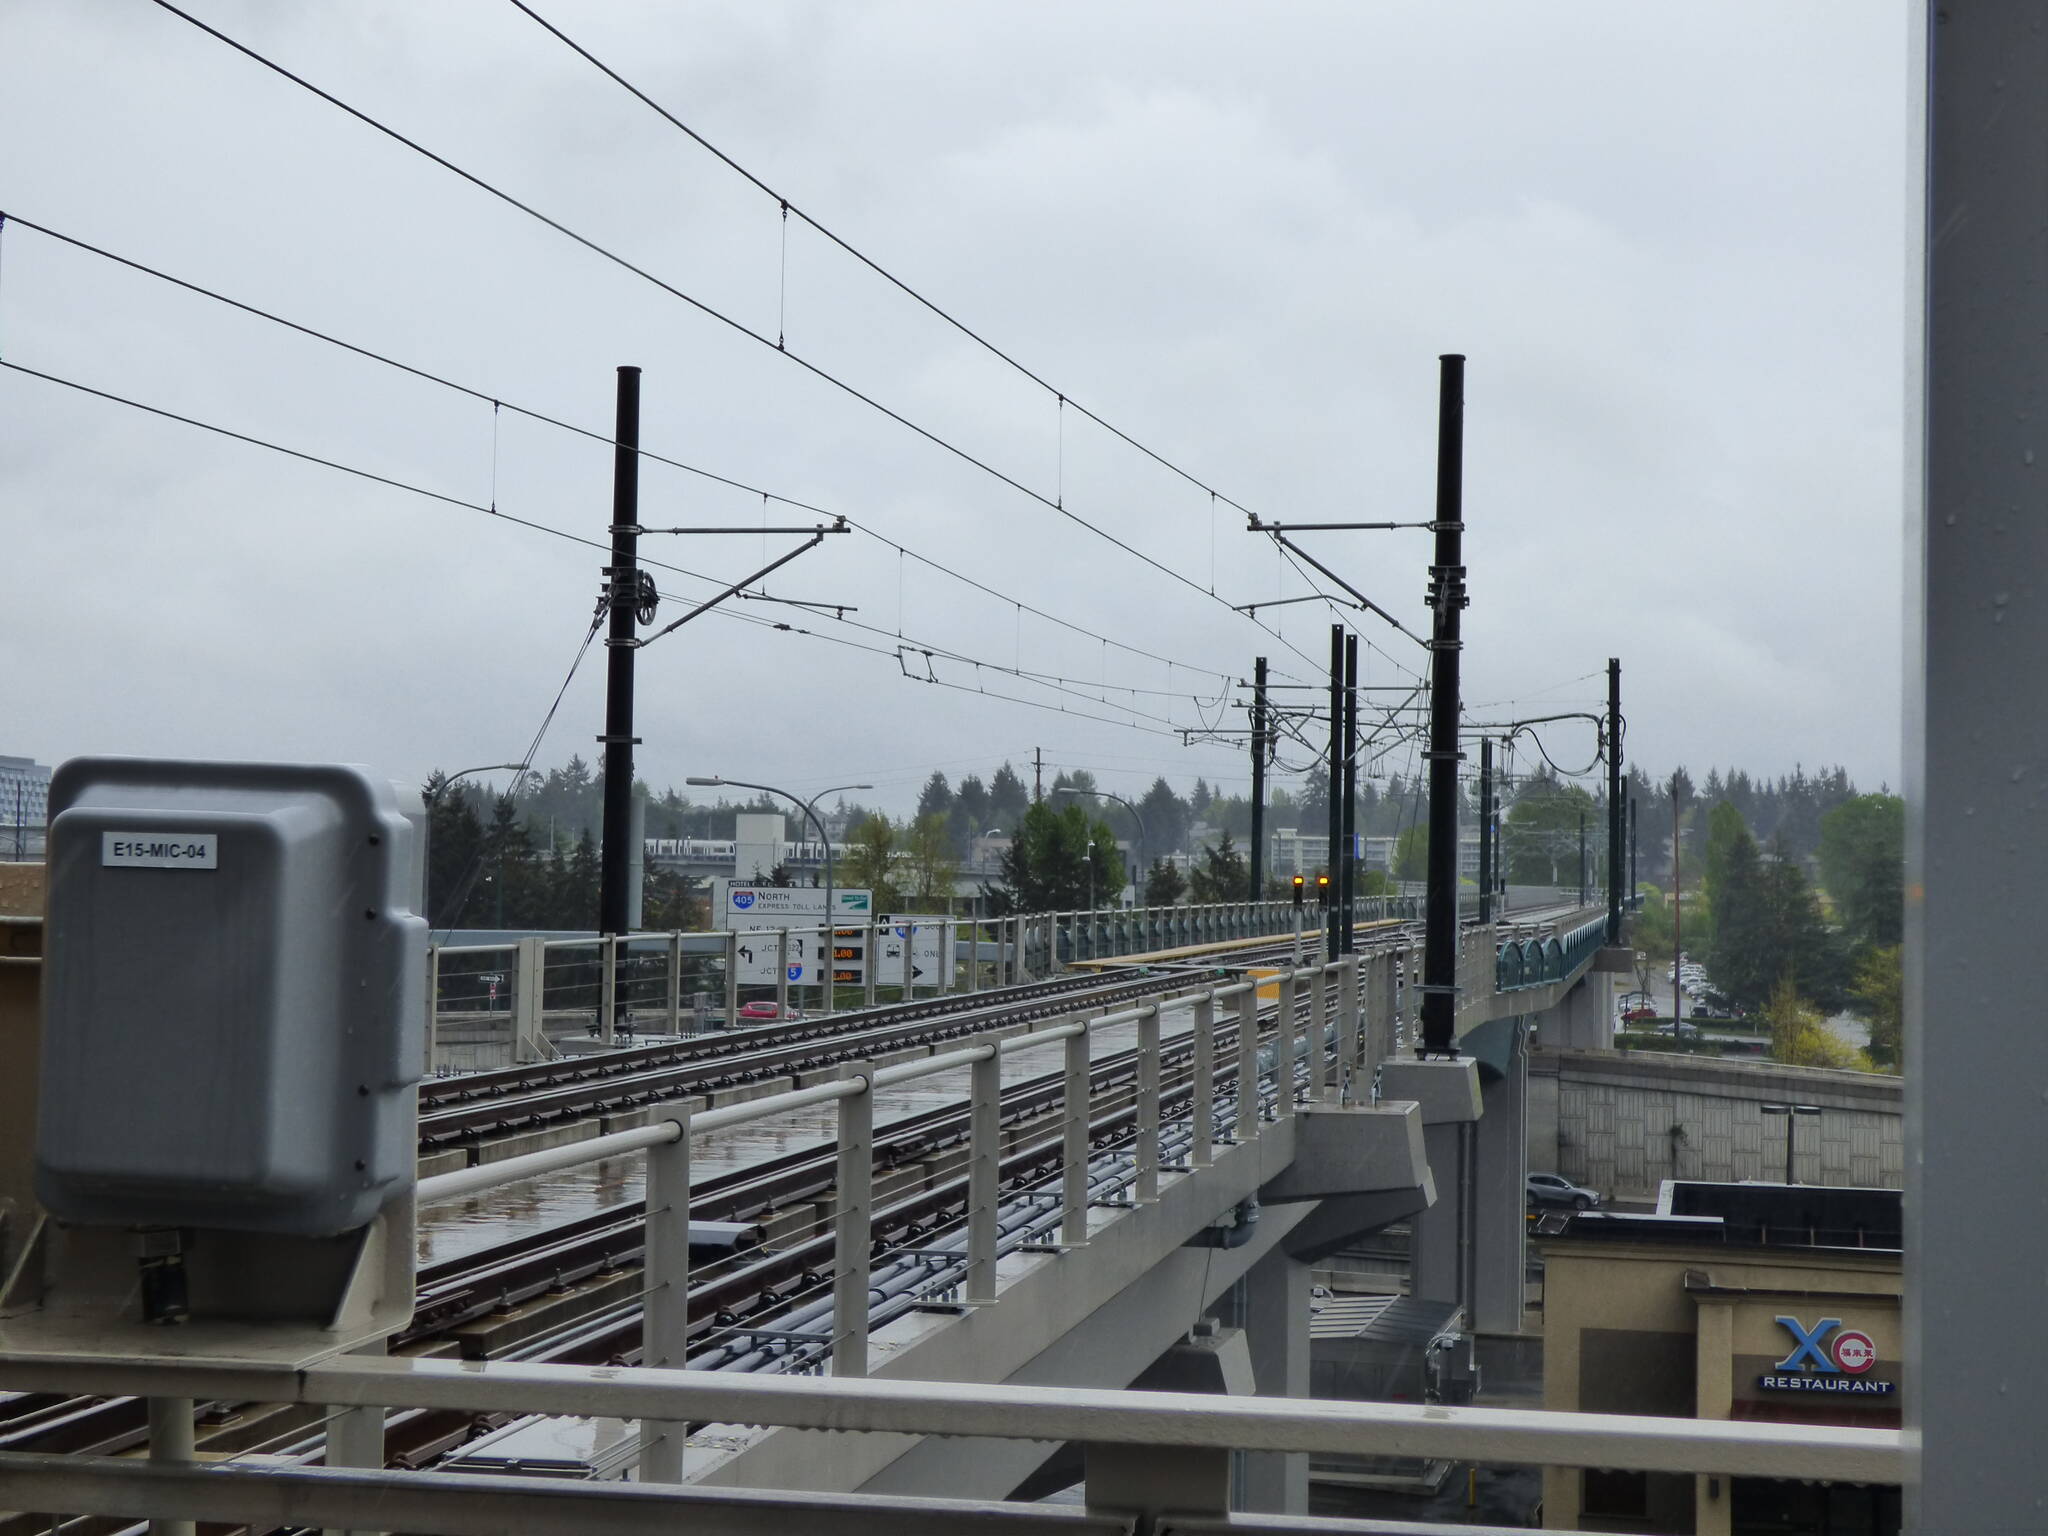 The track crosses over I-405 to and from Redmond. (Cameron Sires/Sound Publishing)